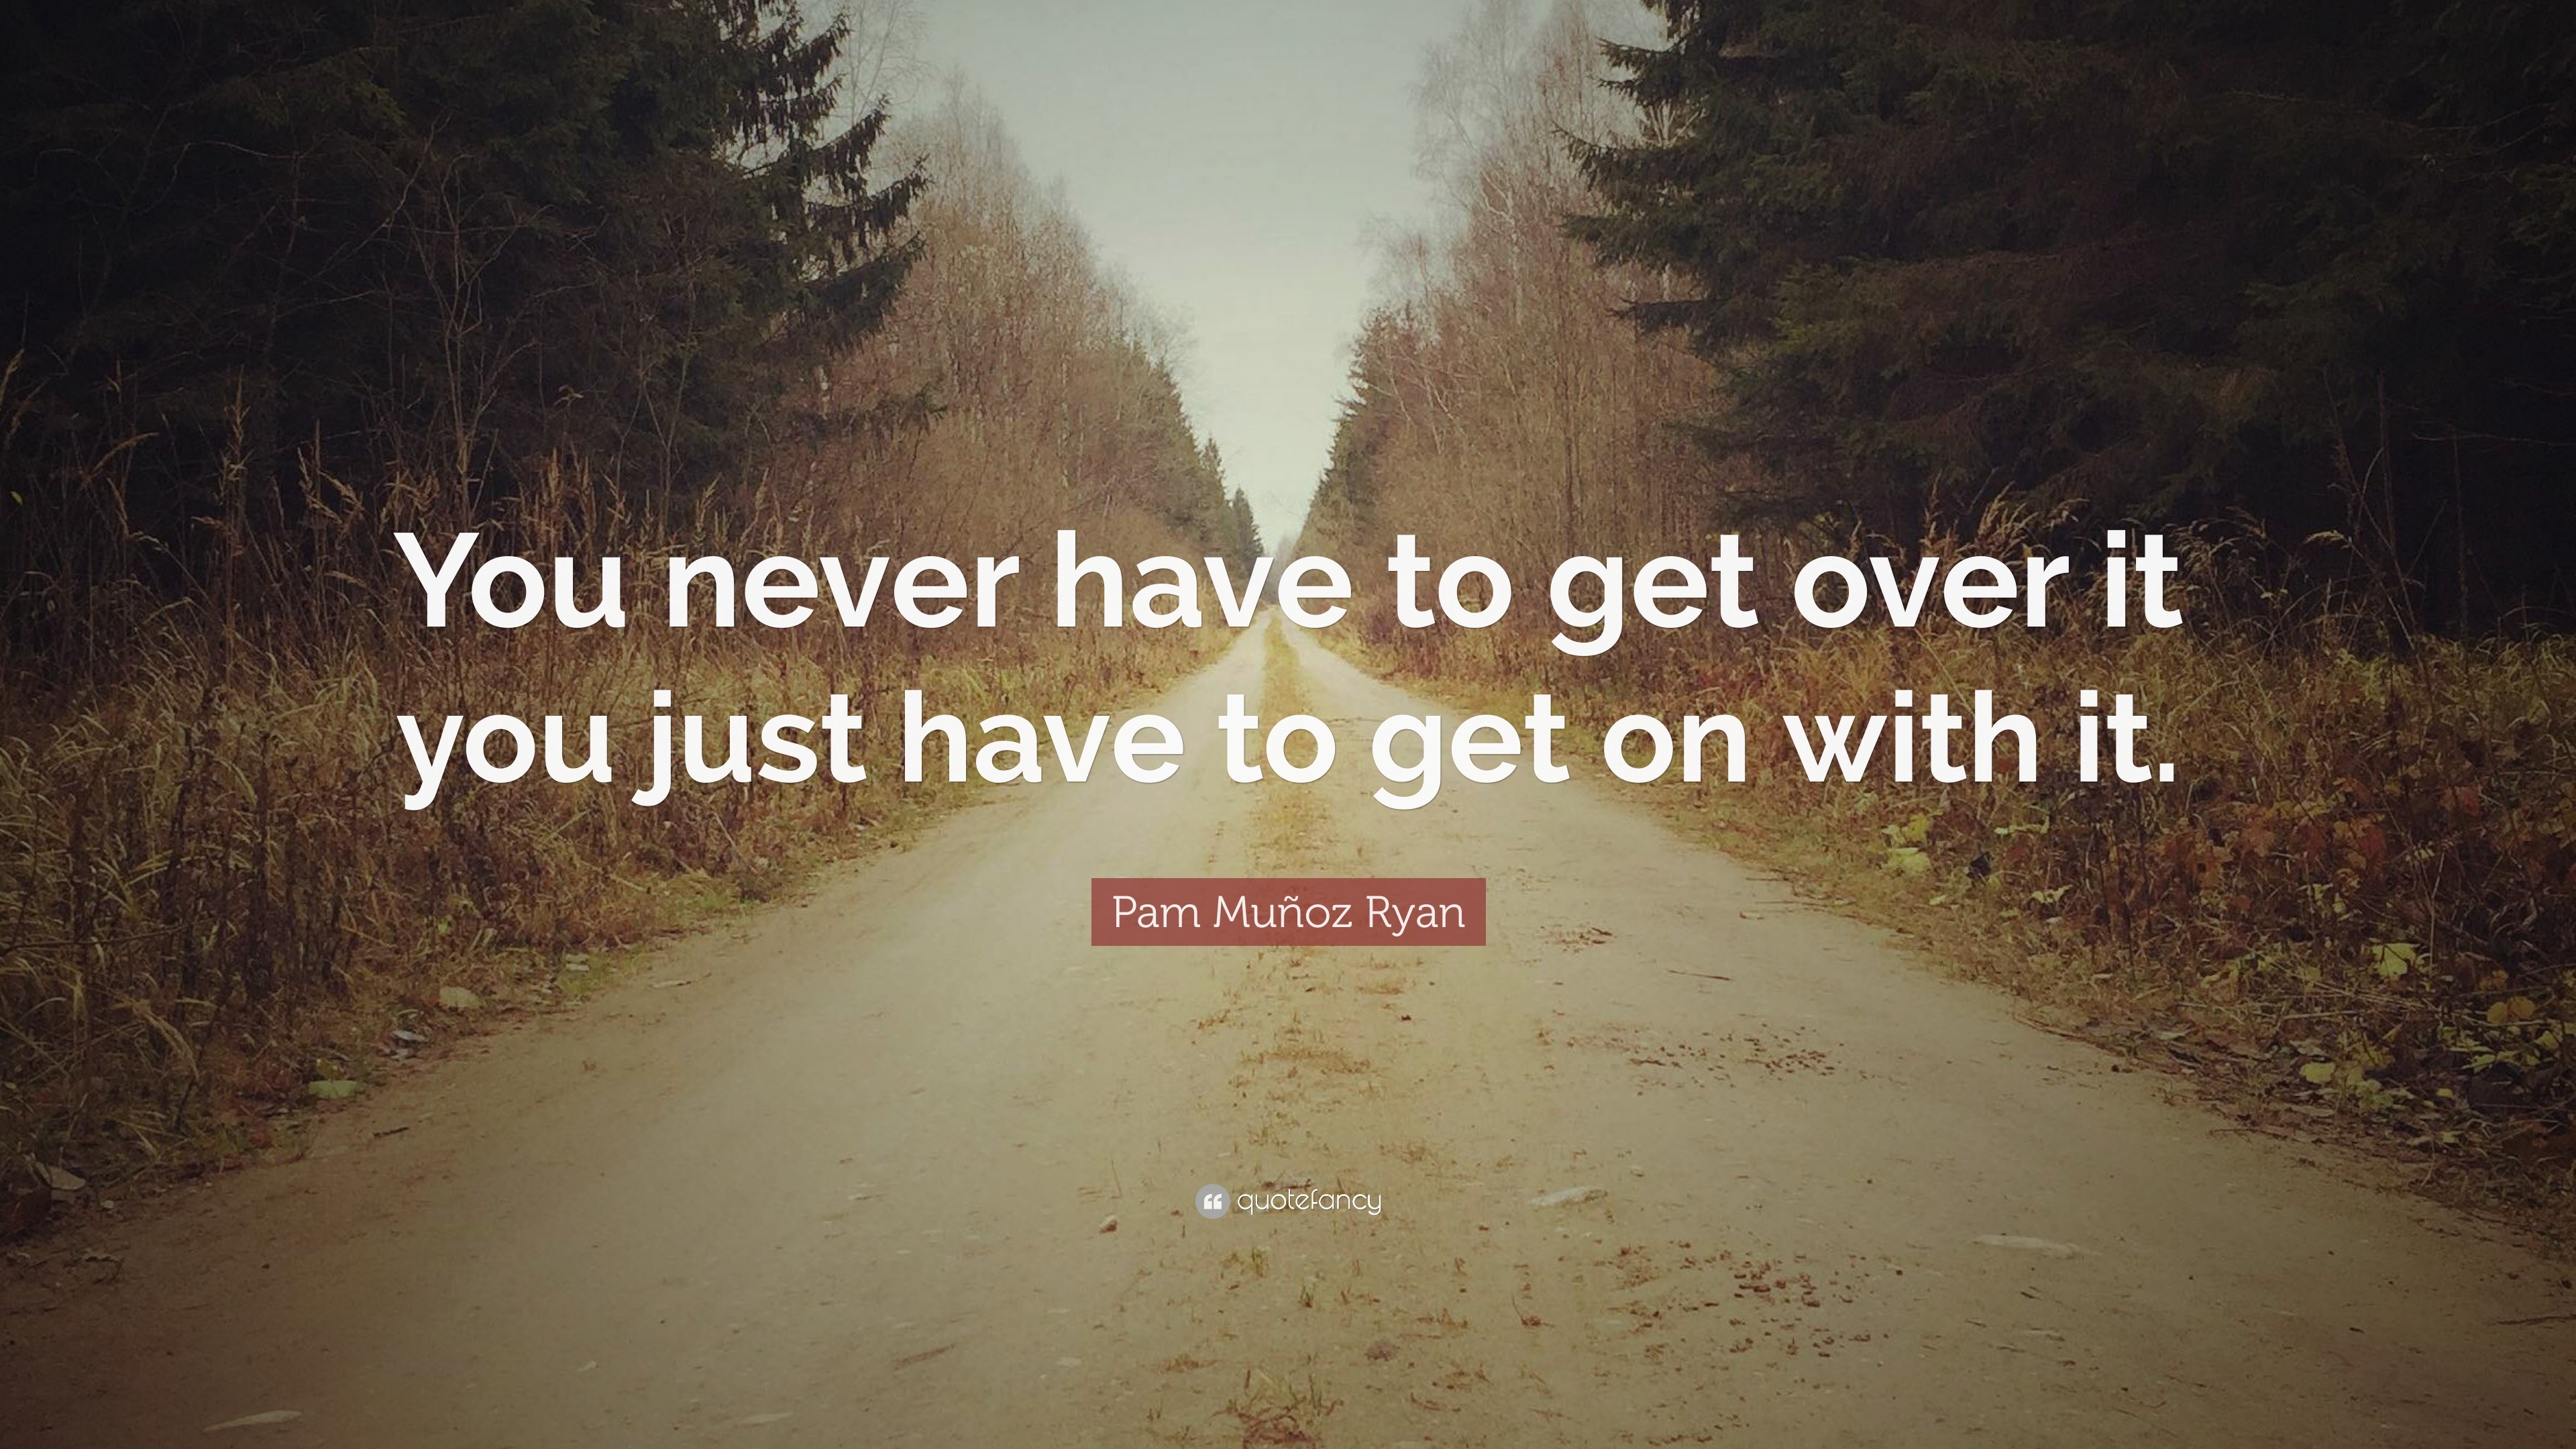 Pam Munoz Ryan Quote You Never Have To Get Over It You Just Have To Get On With It 9 Wallpapers Quotefancy